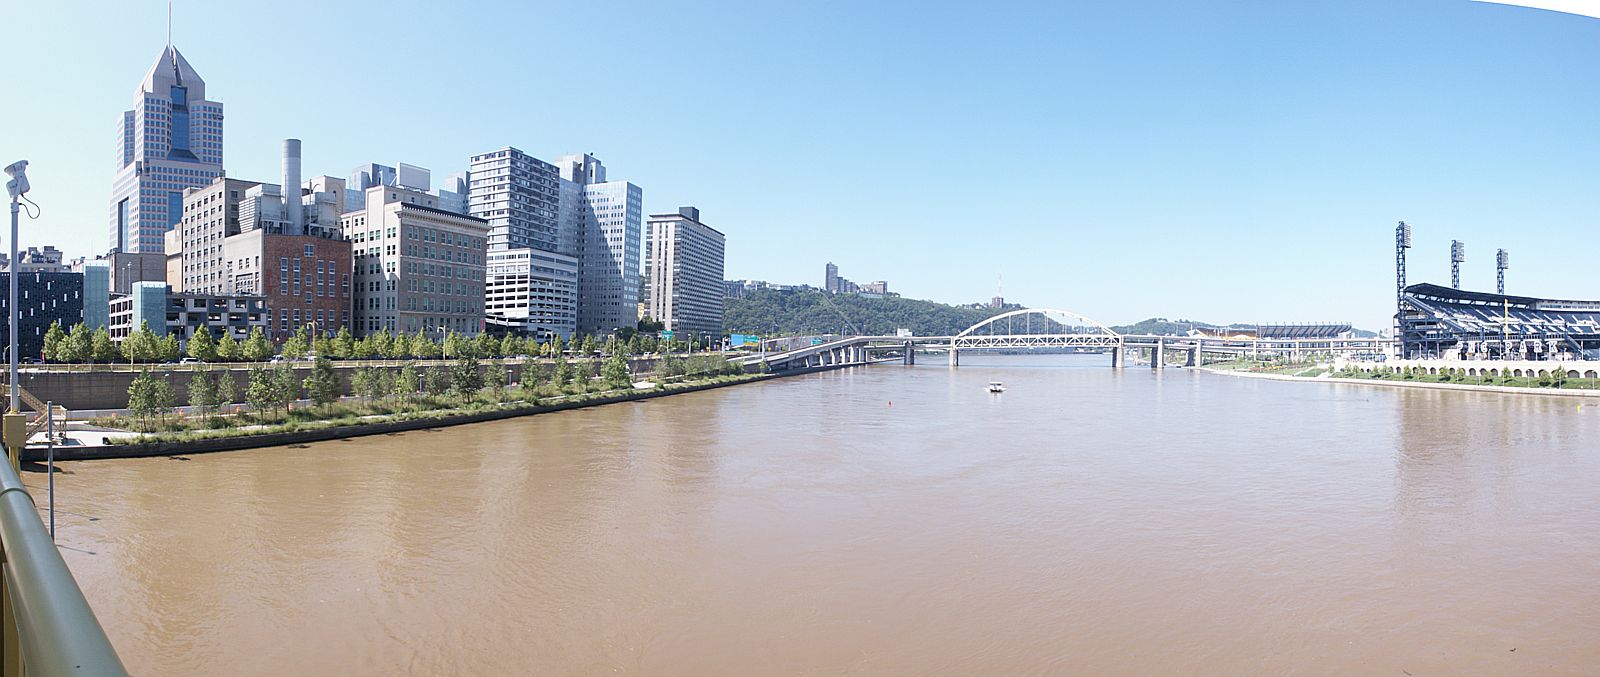 Allegheny River at Pittsburgh